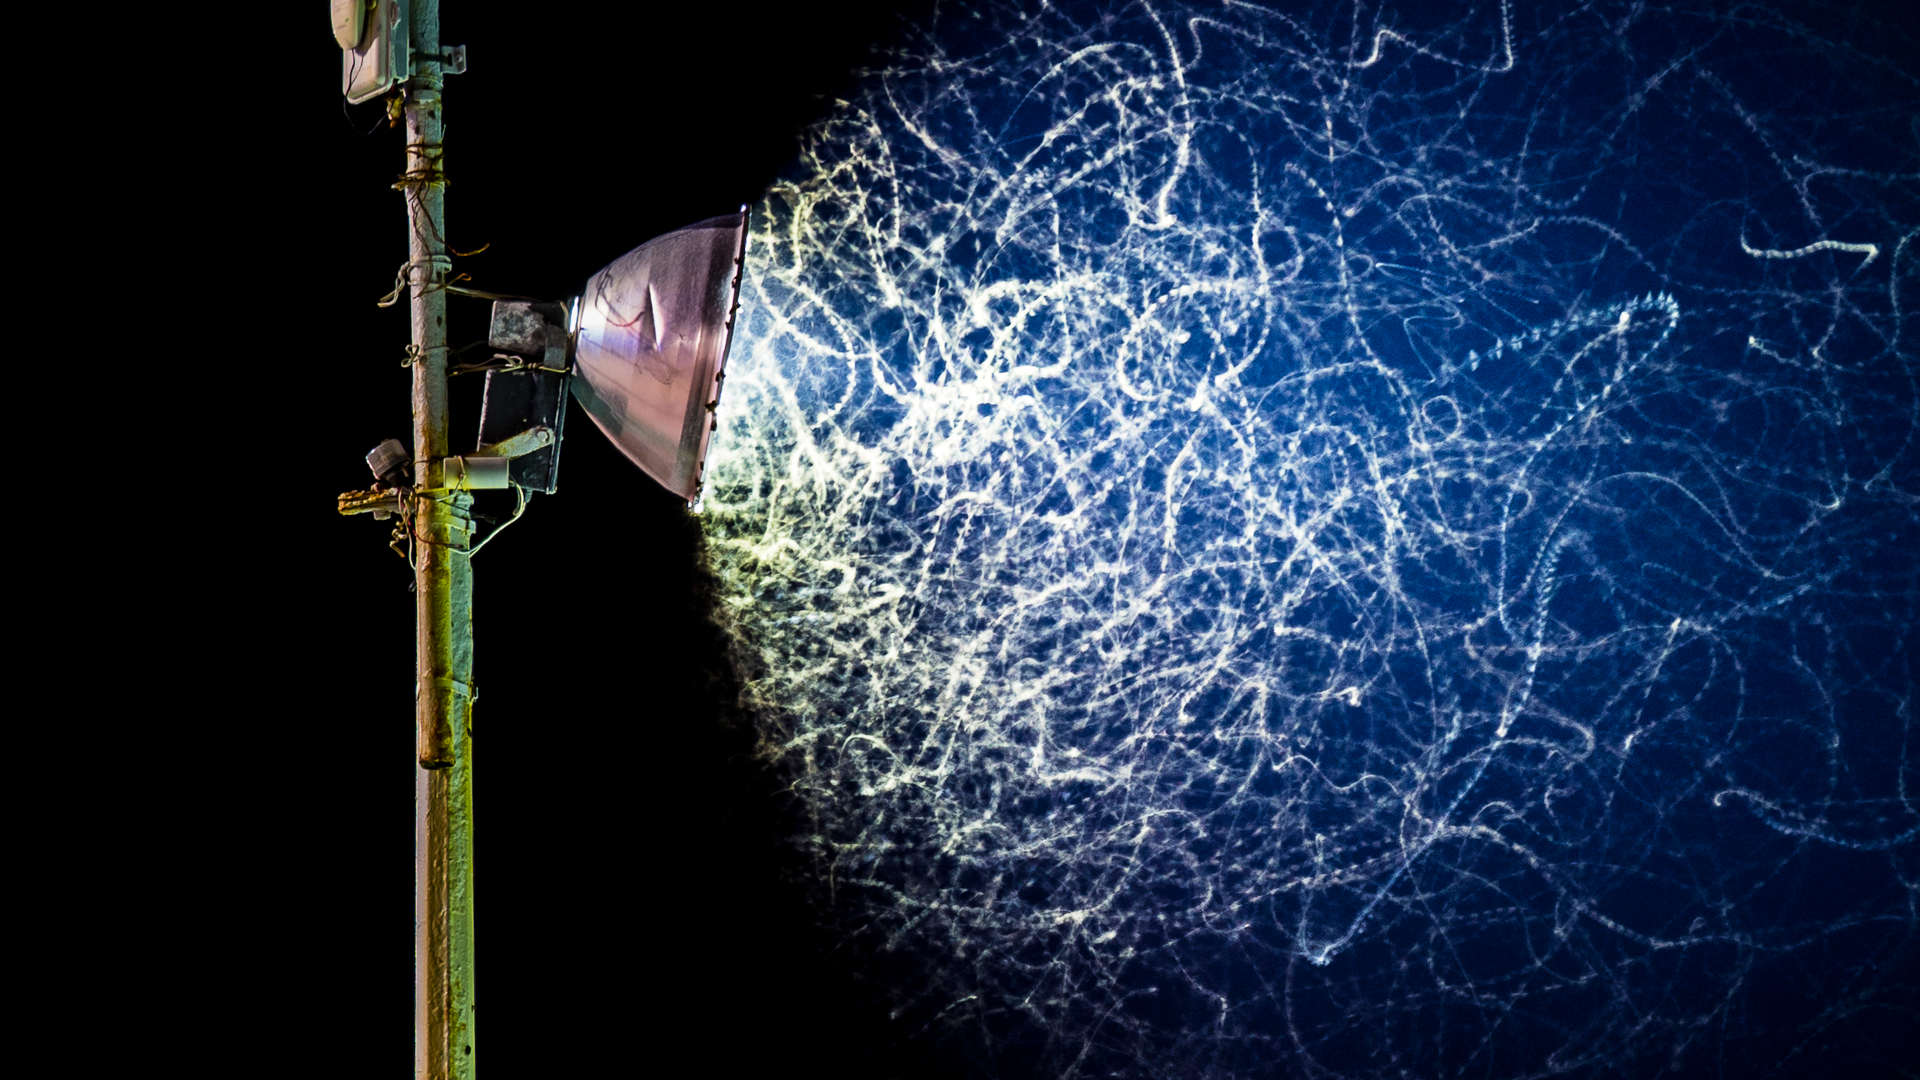 A long exposure photo shows the paths of numerous flying insects attracted to a street light.